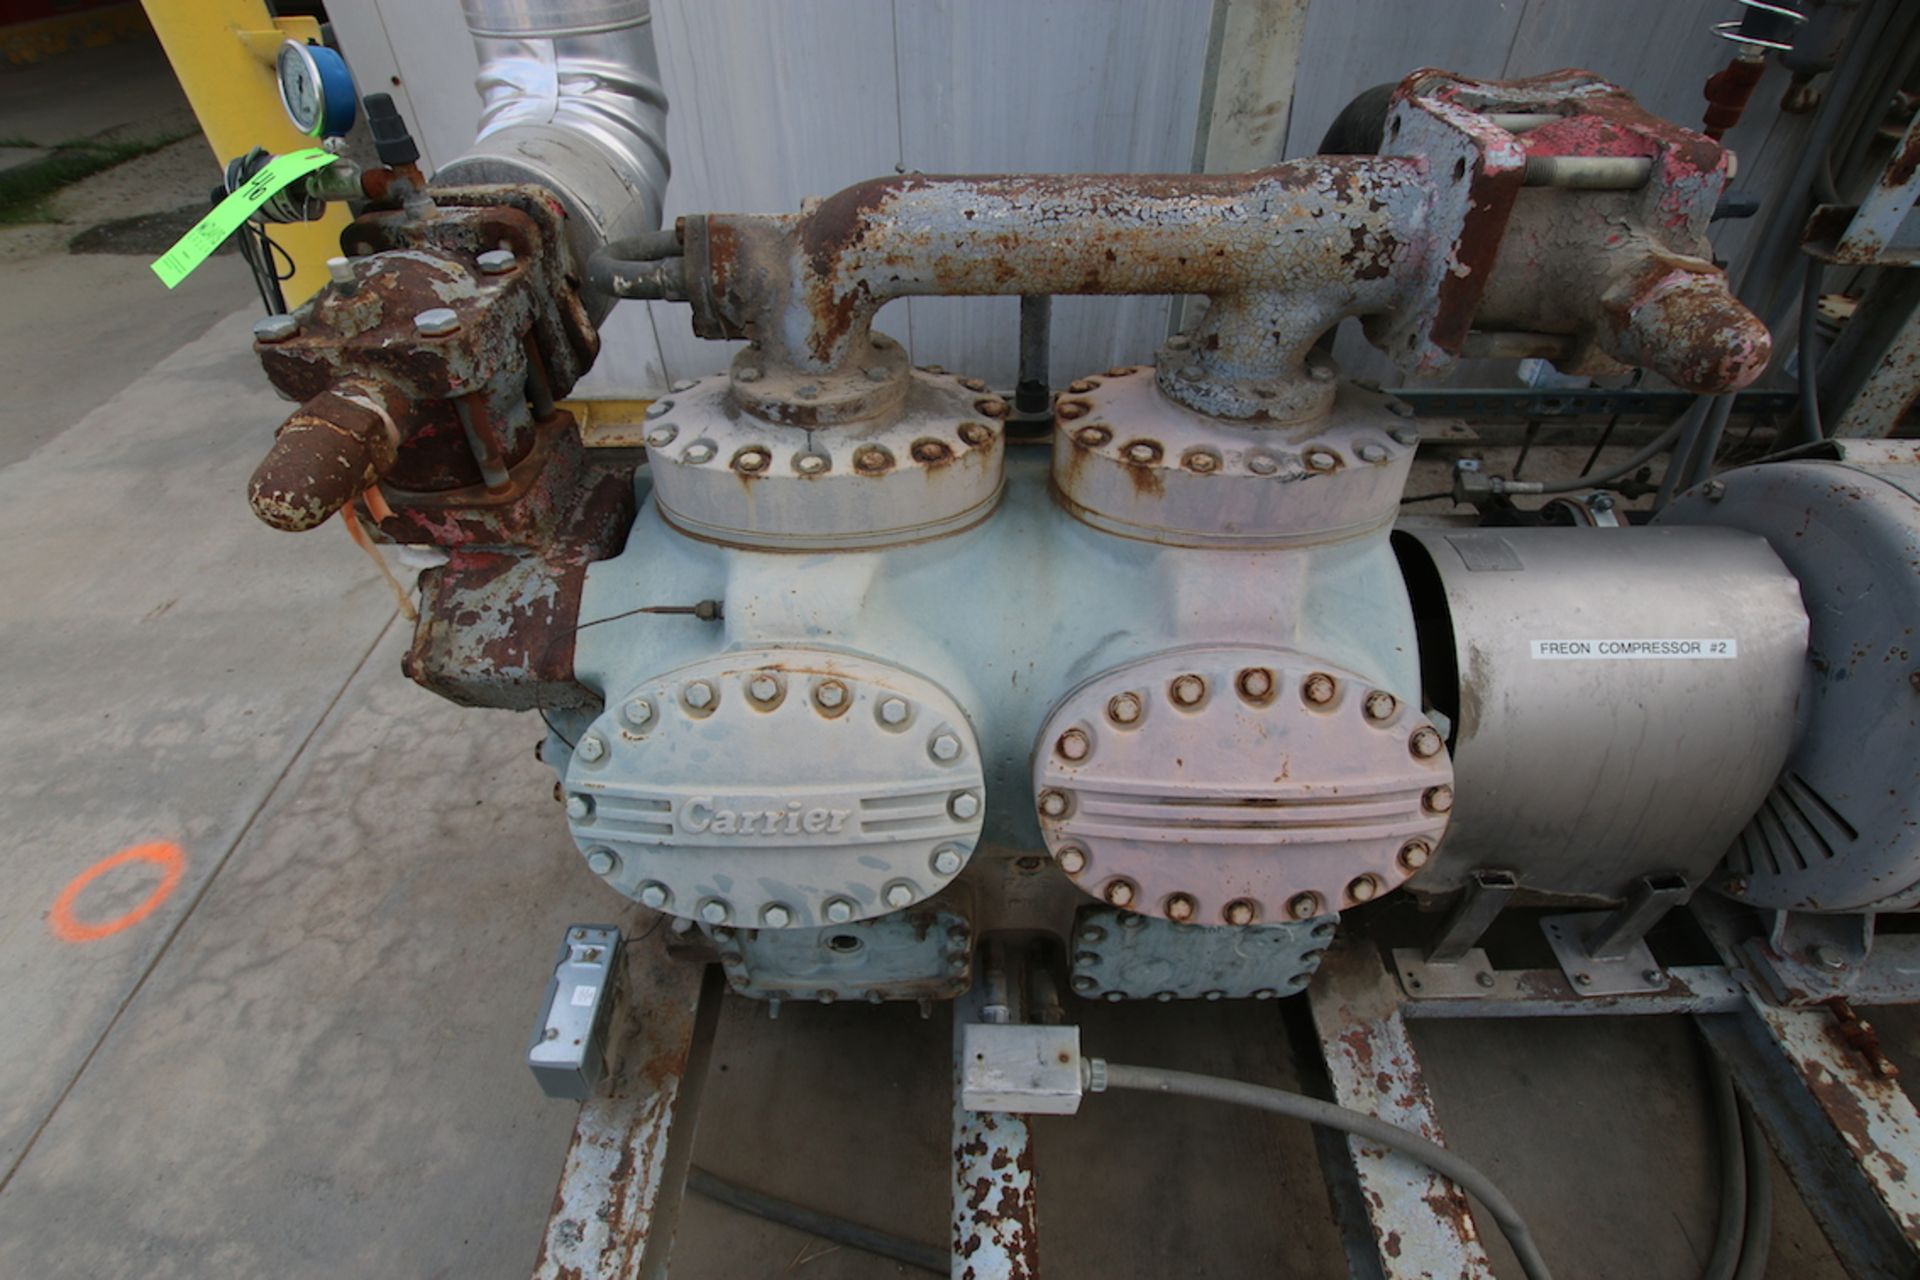 Carrier 12-Cylinder Reciprocating Freon Compressor, Skid Mounted with Lincoln 125 HP Motor, 1775 - Image 2 of 7